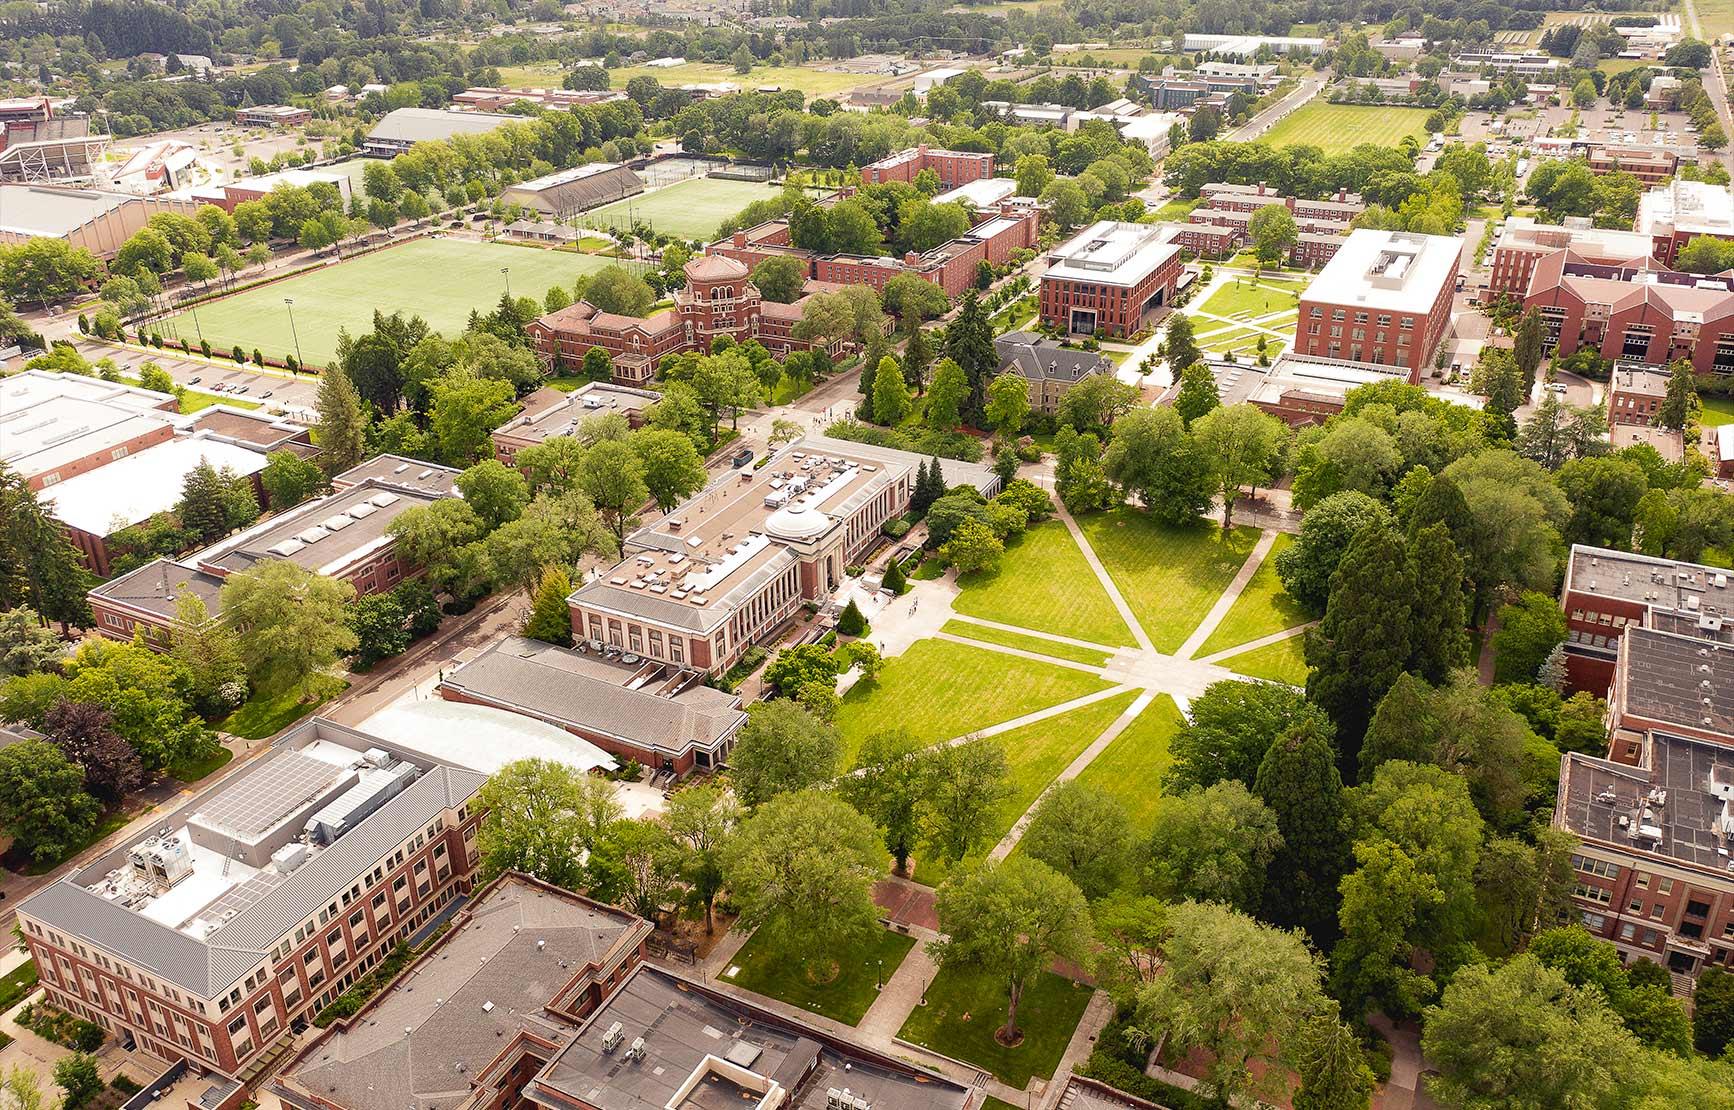 An aerial view of OSU's Corvallis campus.